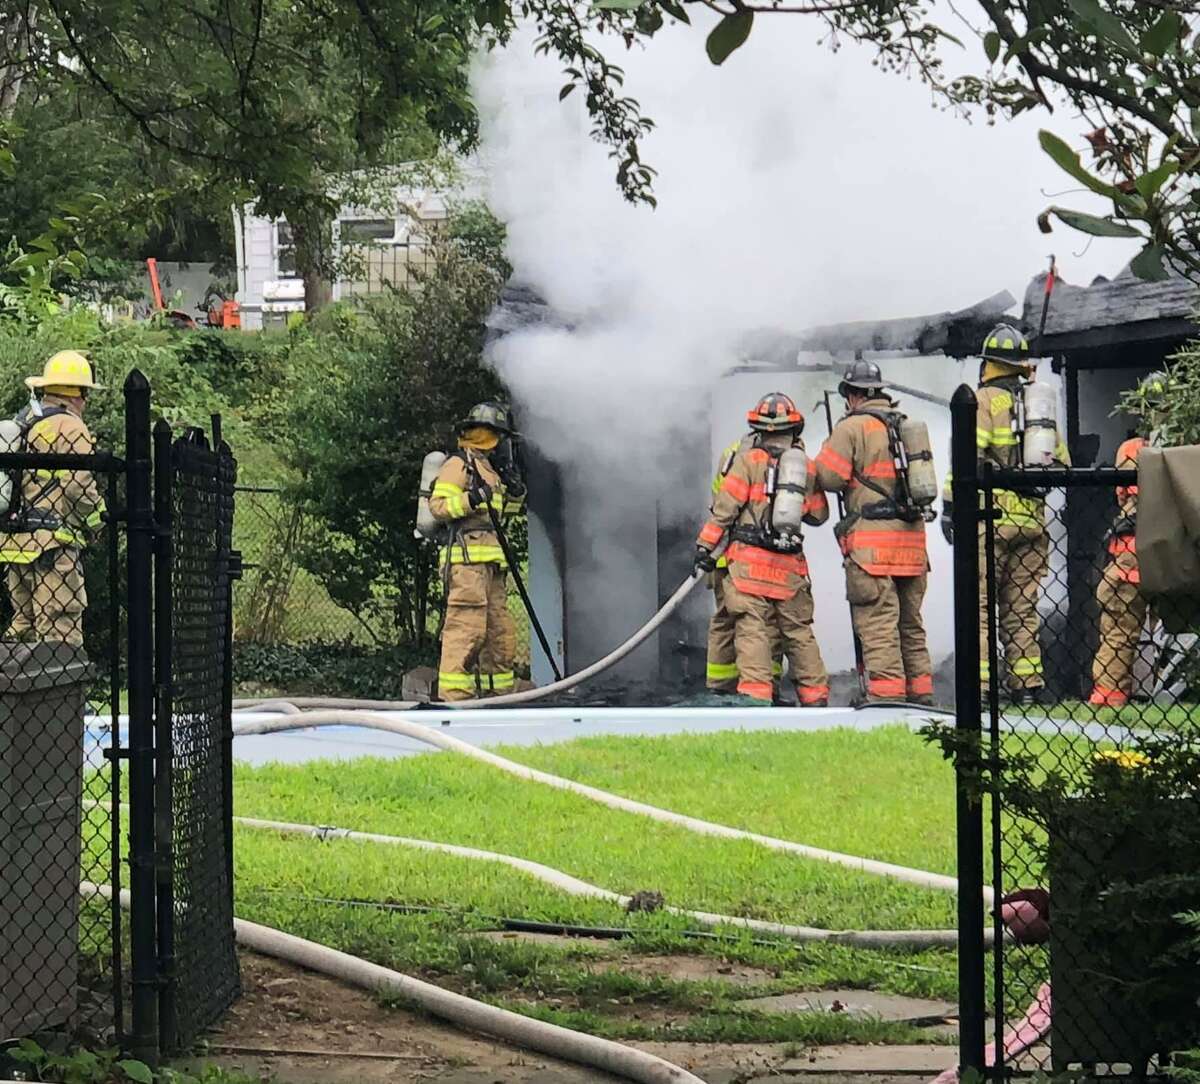 Firefighters at the scene of a pool house fire in Brookfield, Conn., the morning of July 31, 2020.